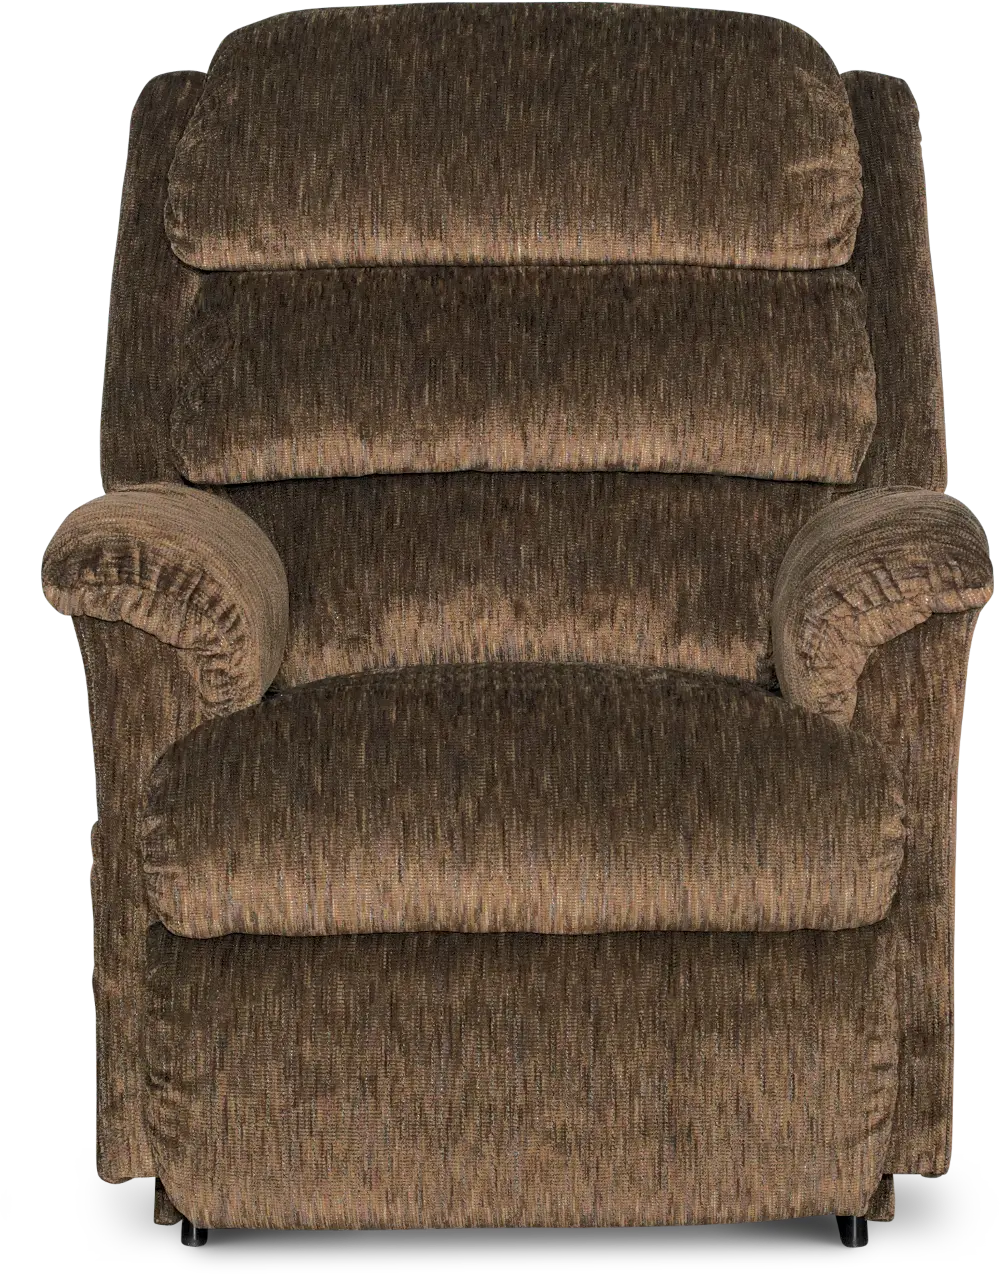 1PH-519/C993475 Melody Earth Brown Lift Chair - Astor-1